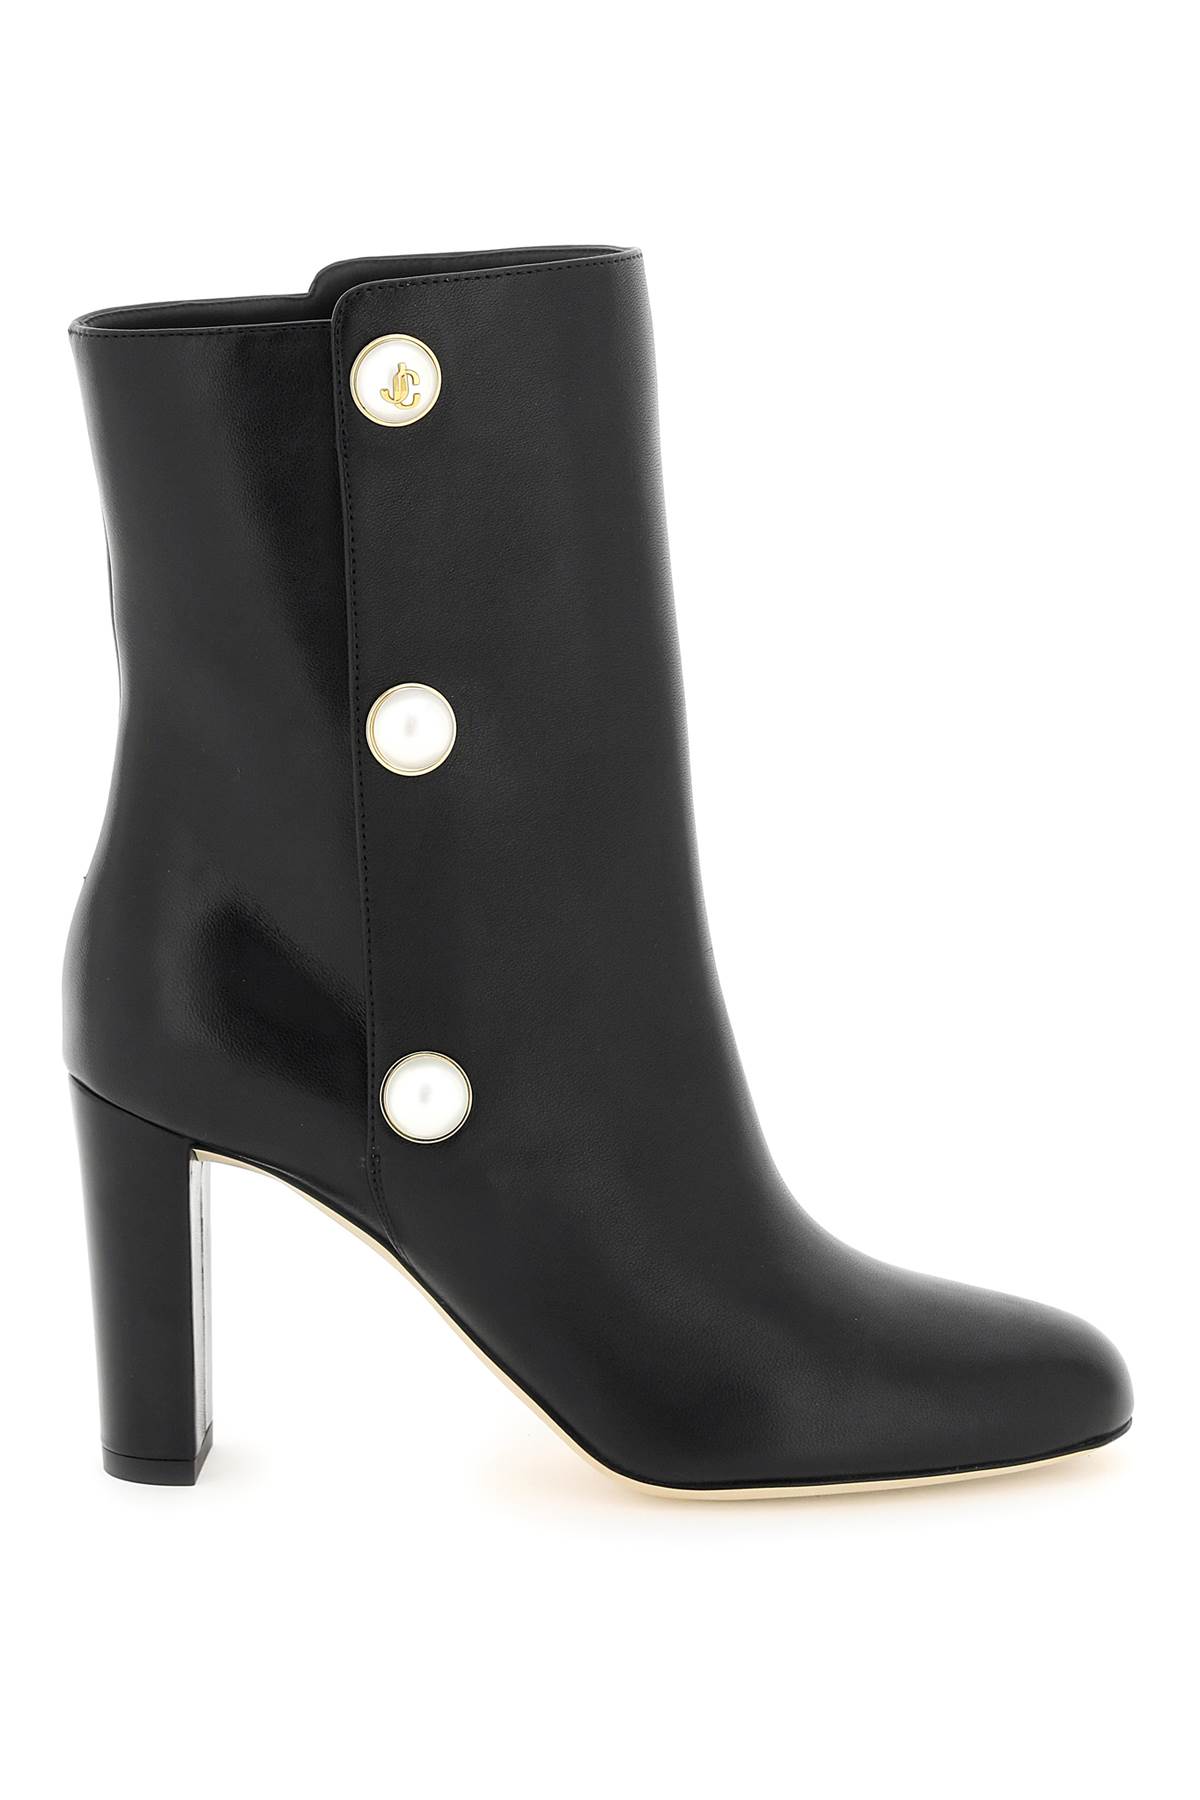 Jimmy Choo rina Nappa Leather Ankle Boots